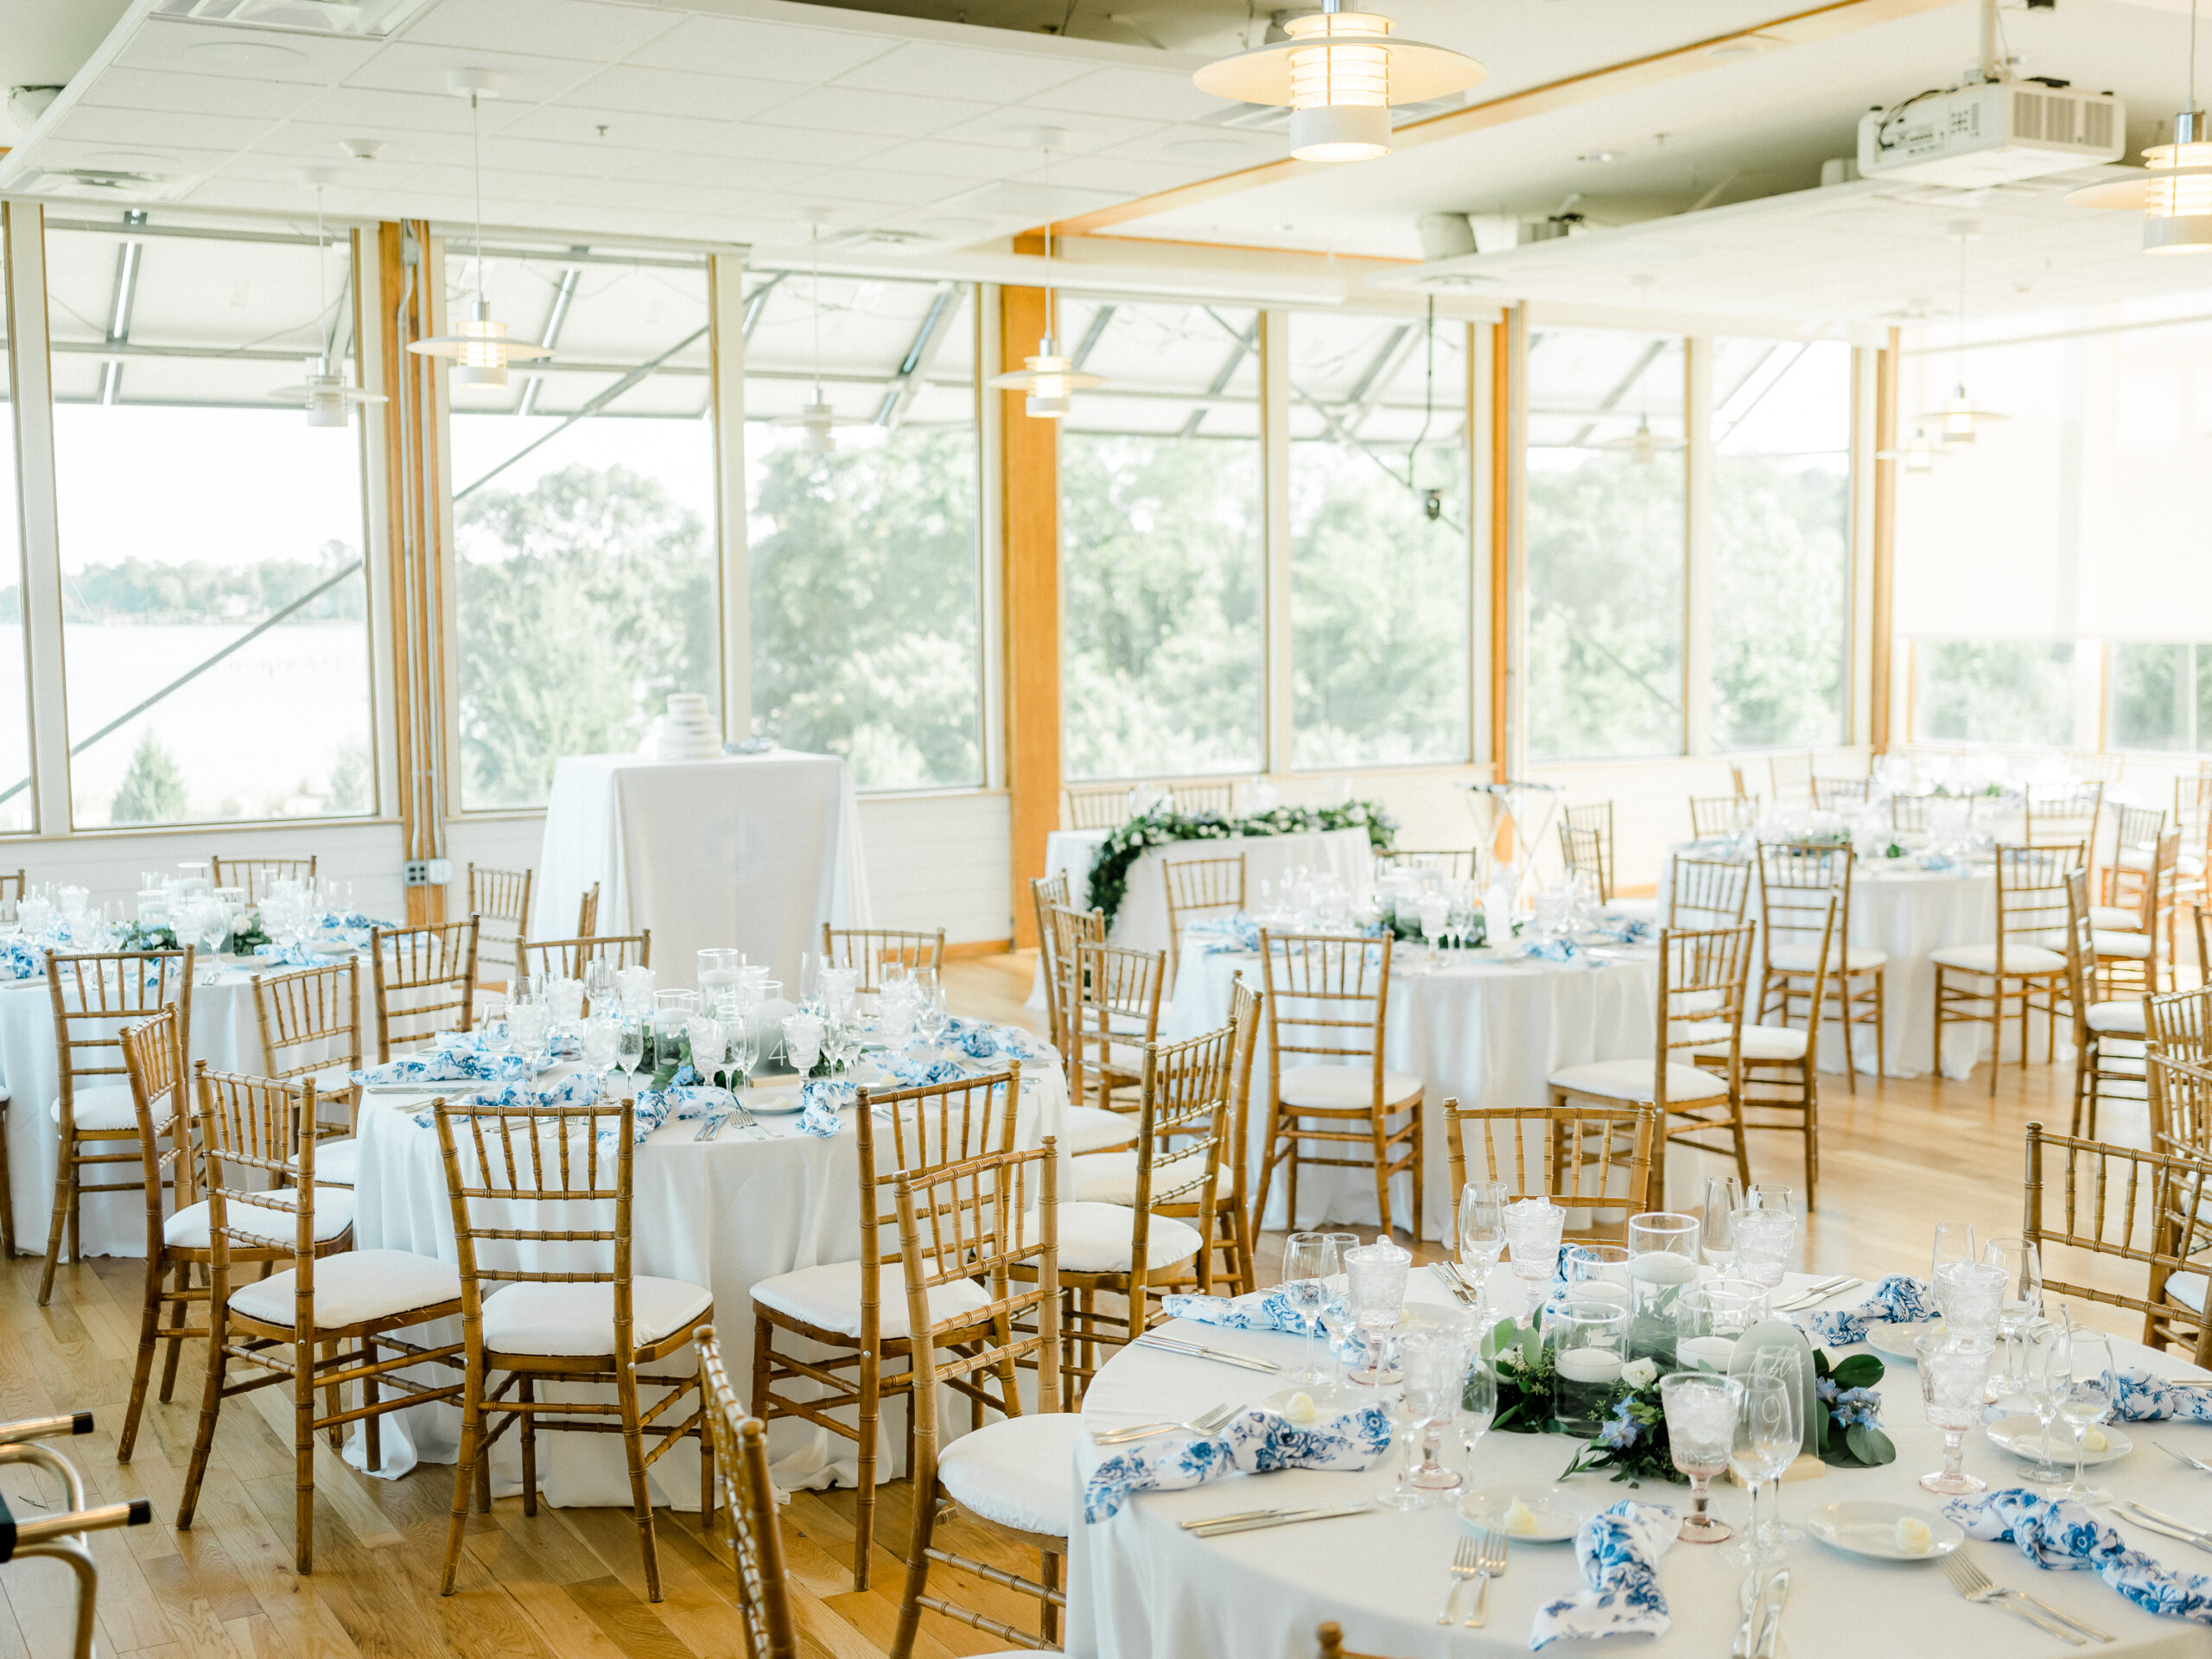 A vintage, romantic, wedding on the Chesapeake Bay in Annapolis, Maryland.